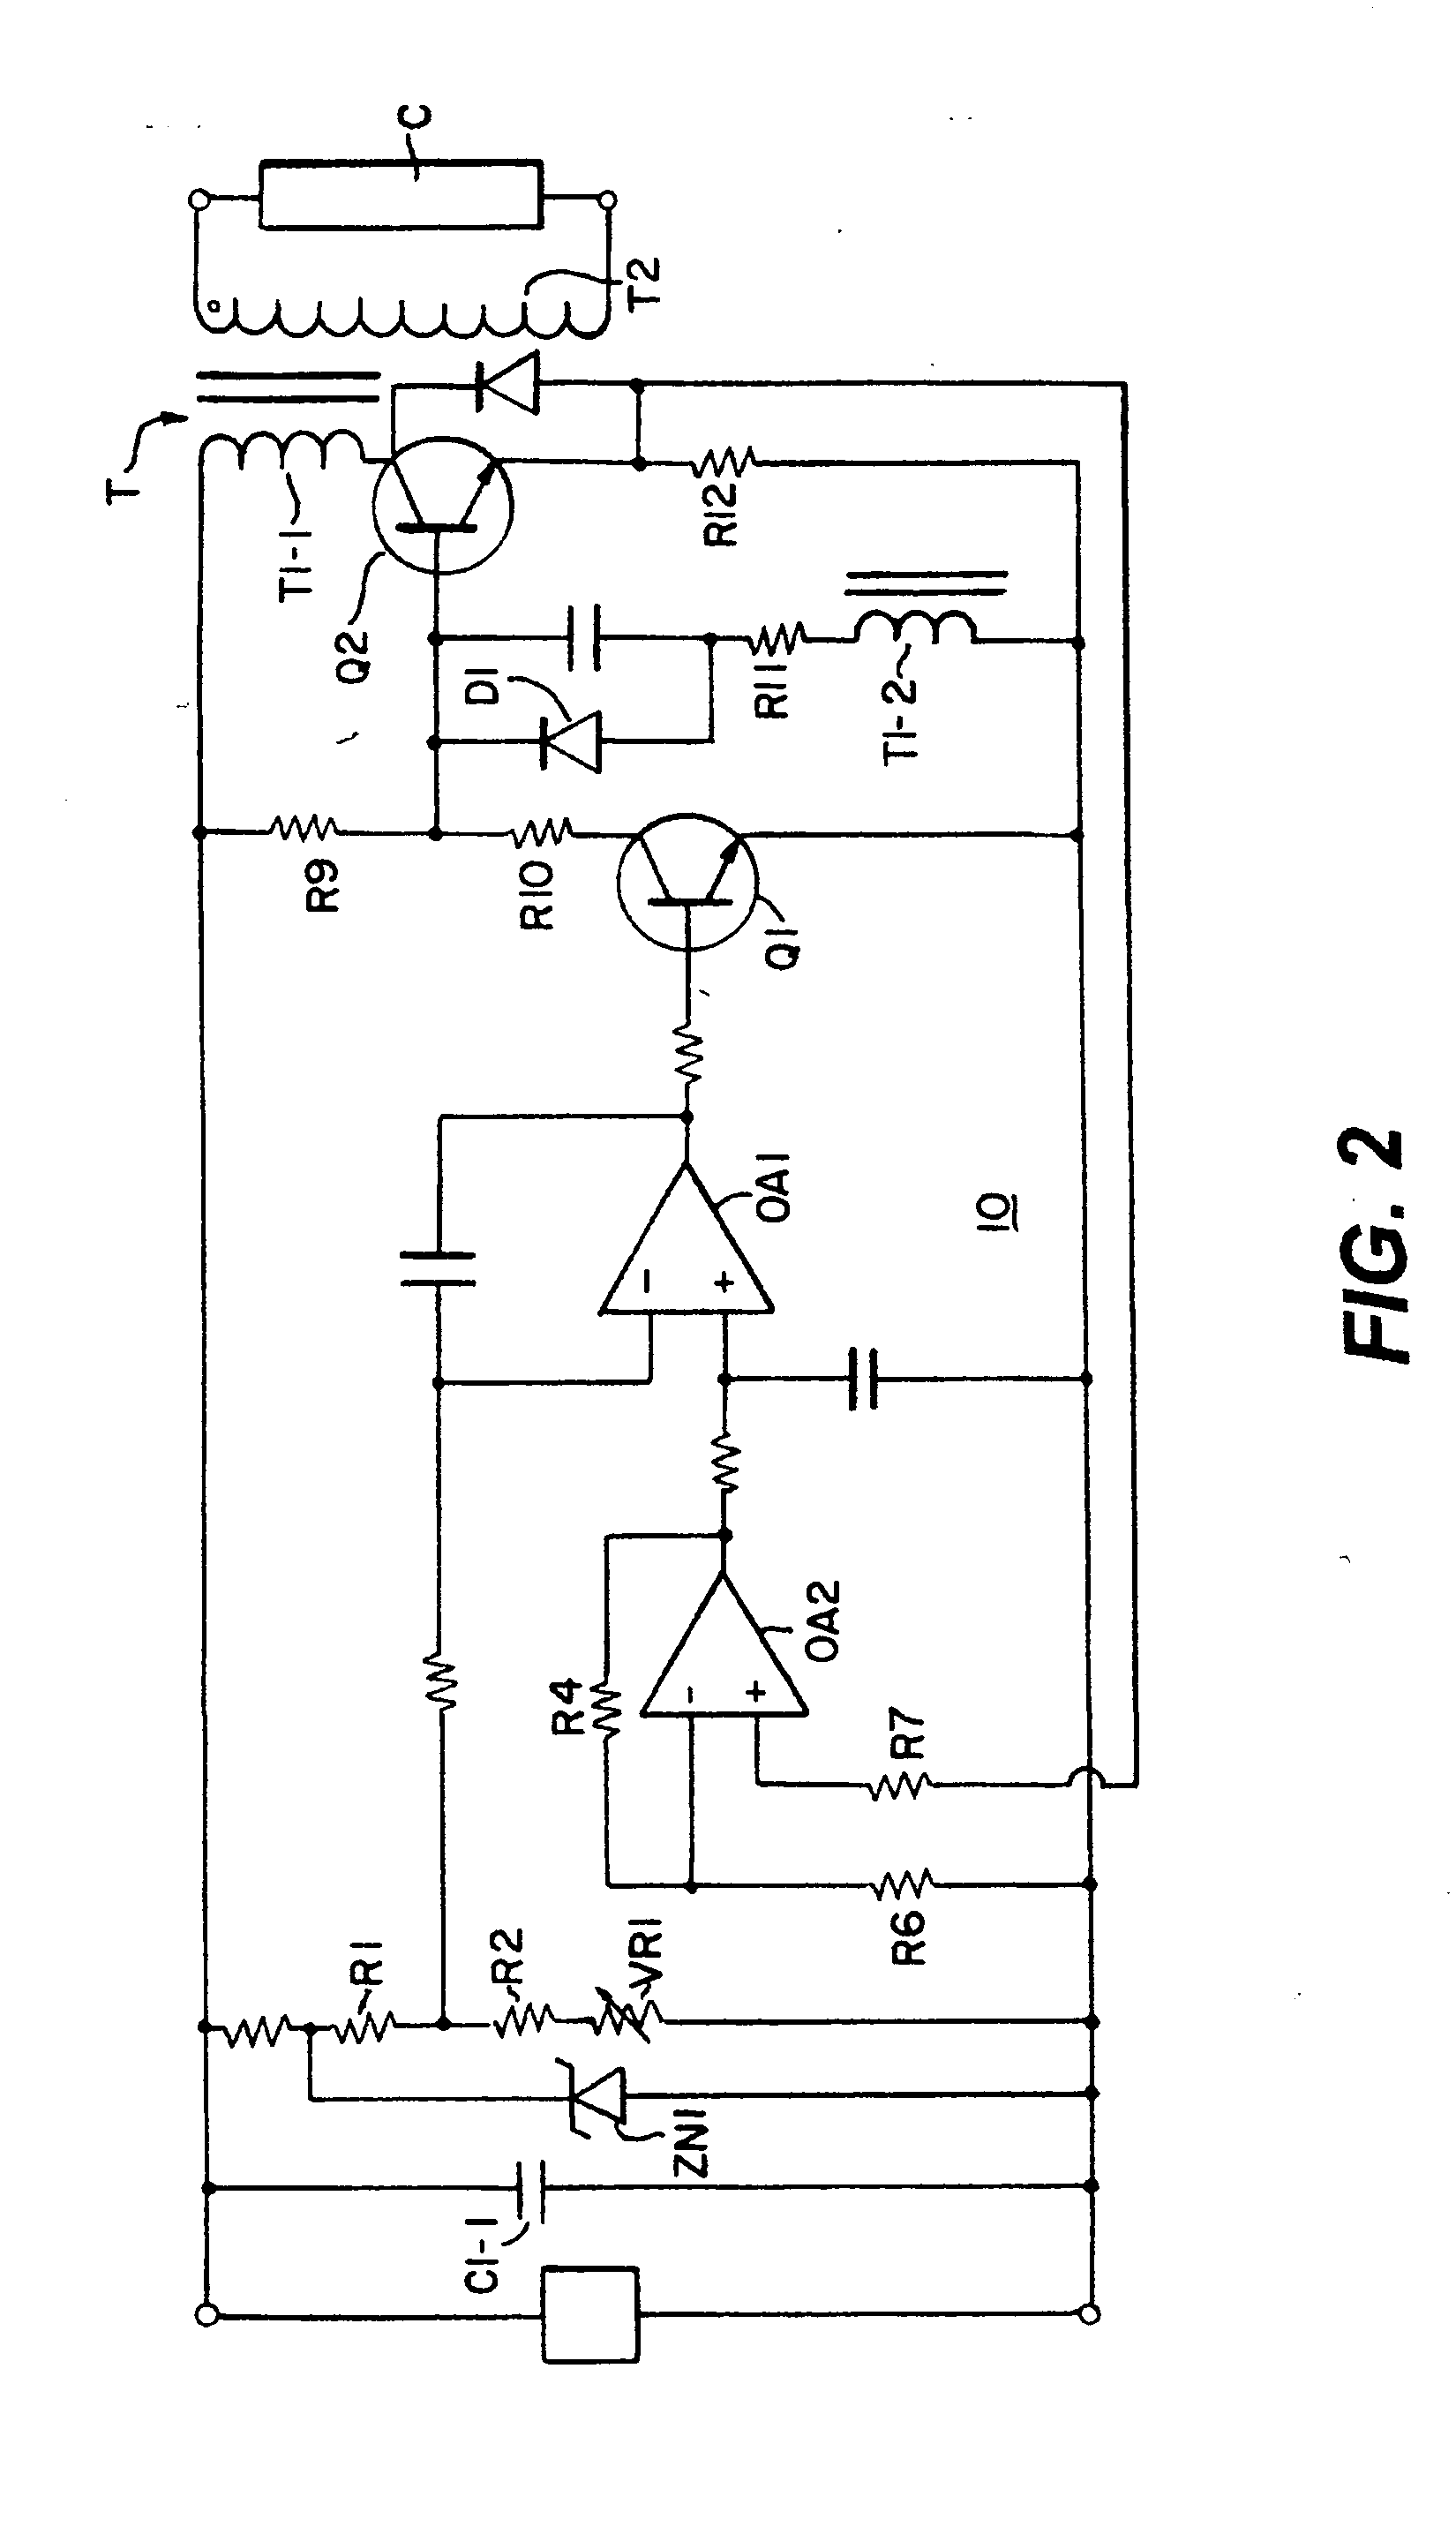 Apparatus for confinement of the short-lived hydroxyradical OH associated with ozone reaction processes